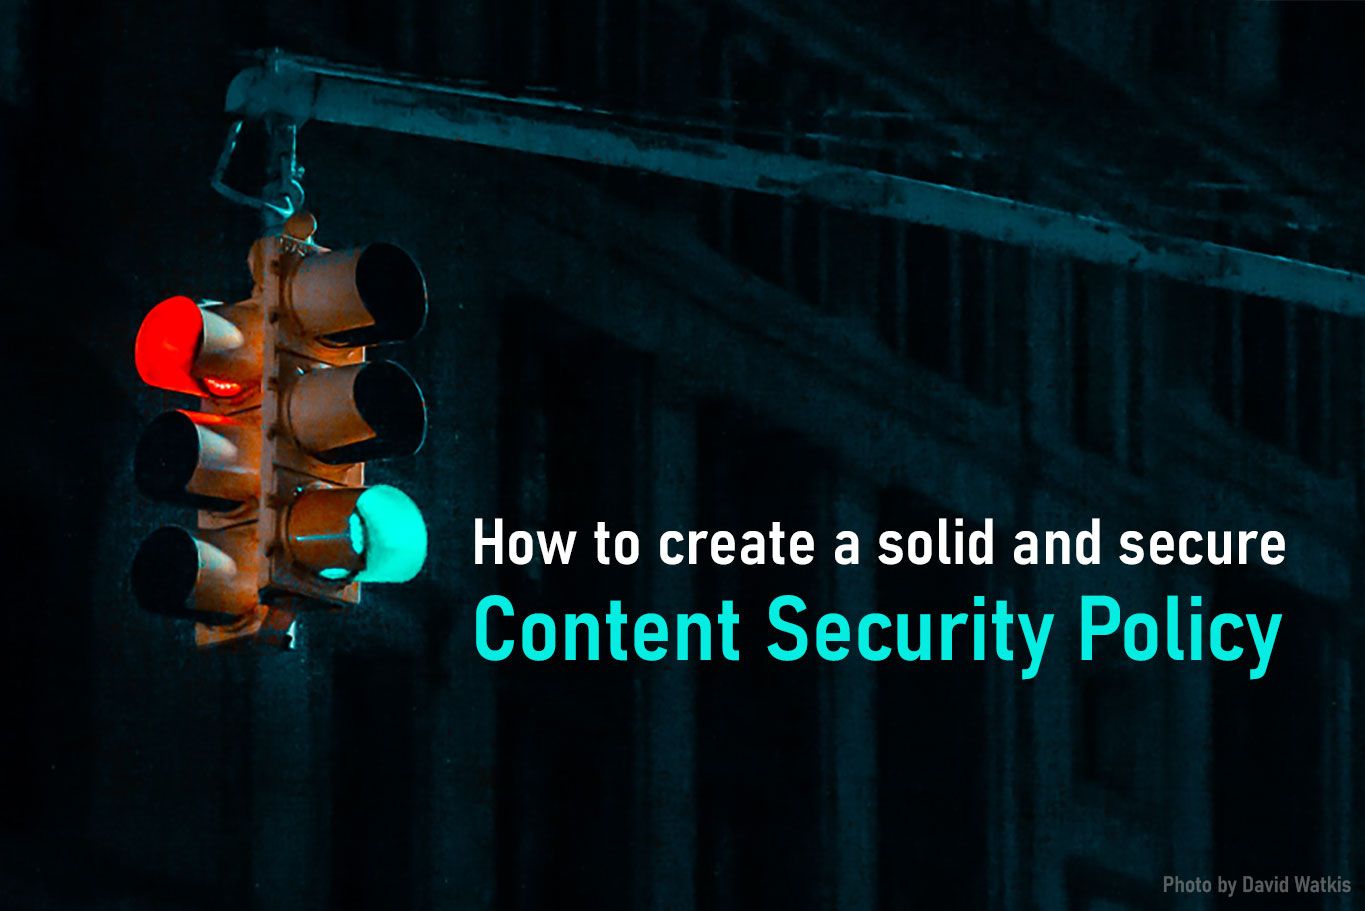 How to create a solid and secure Content Security Policy